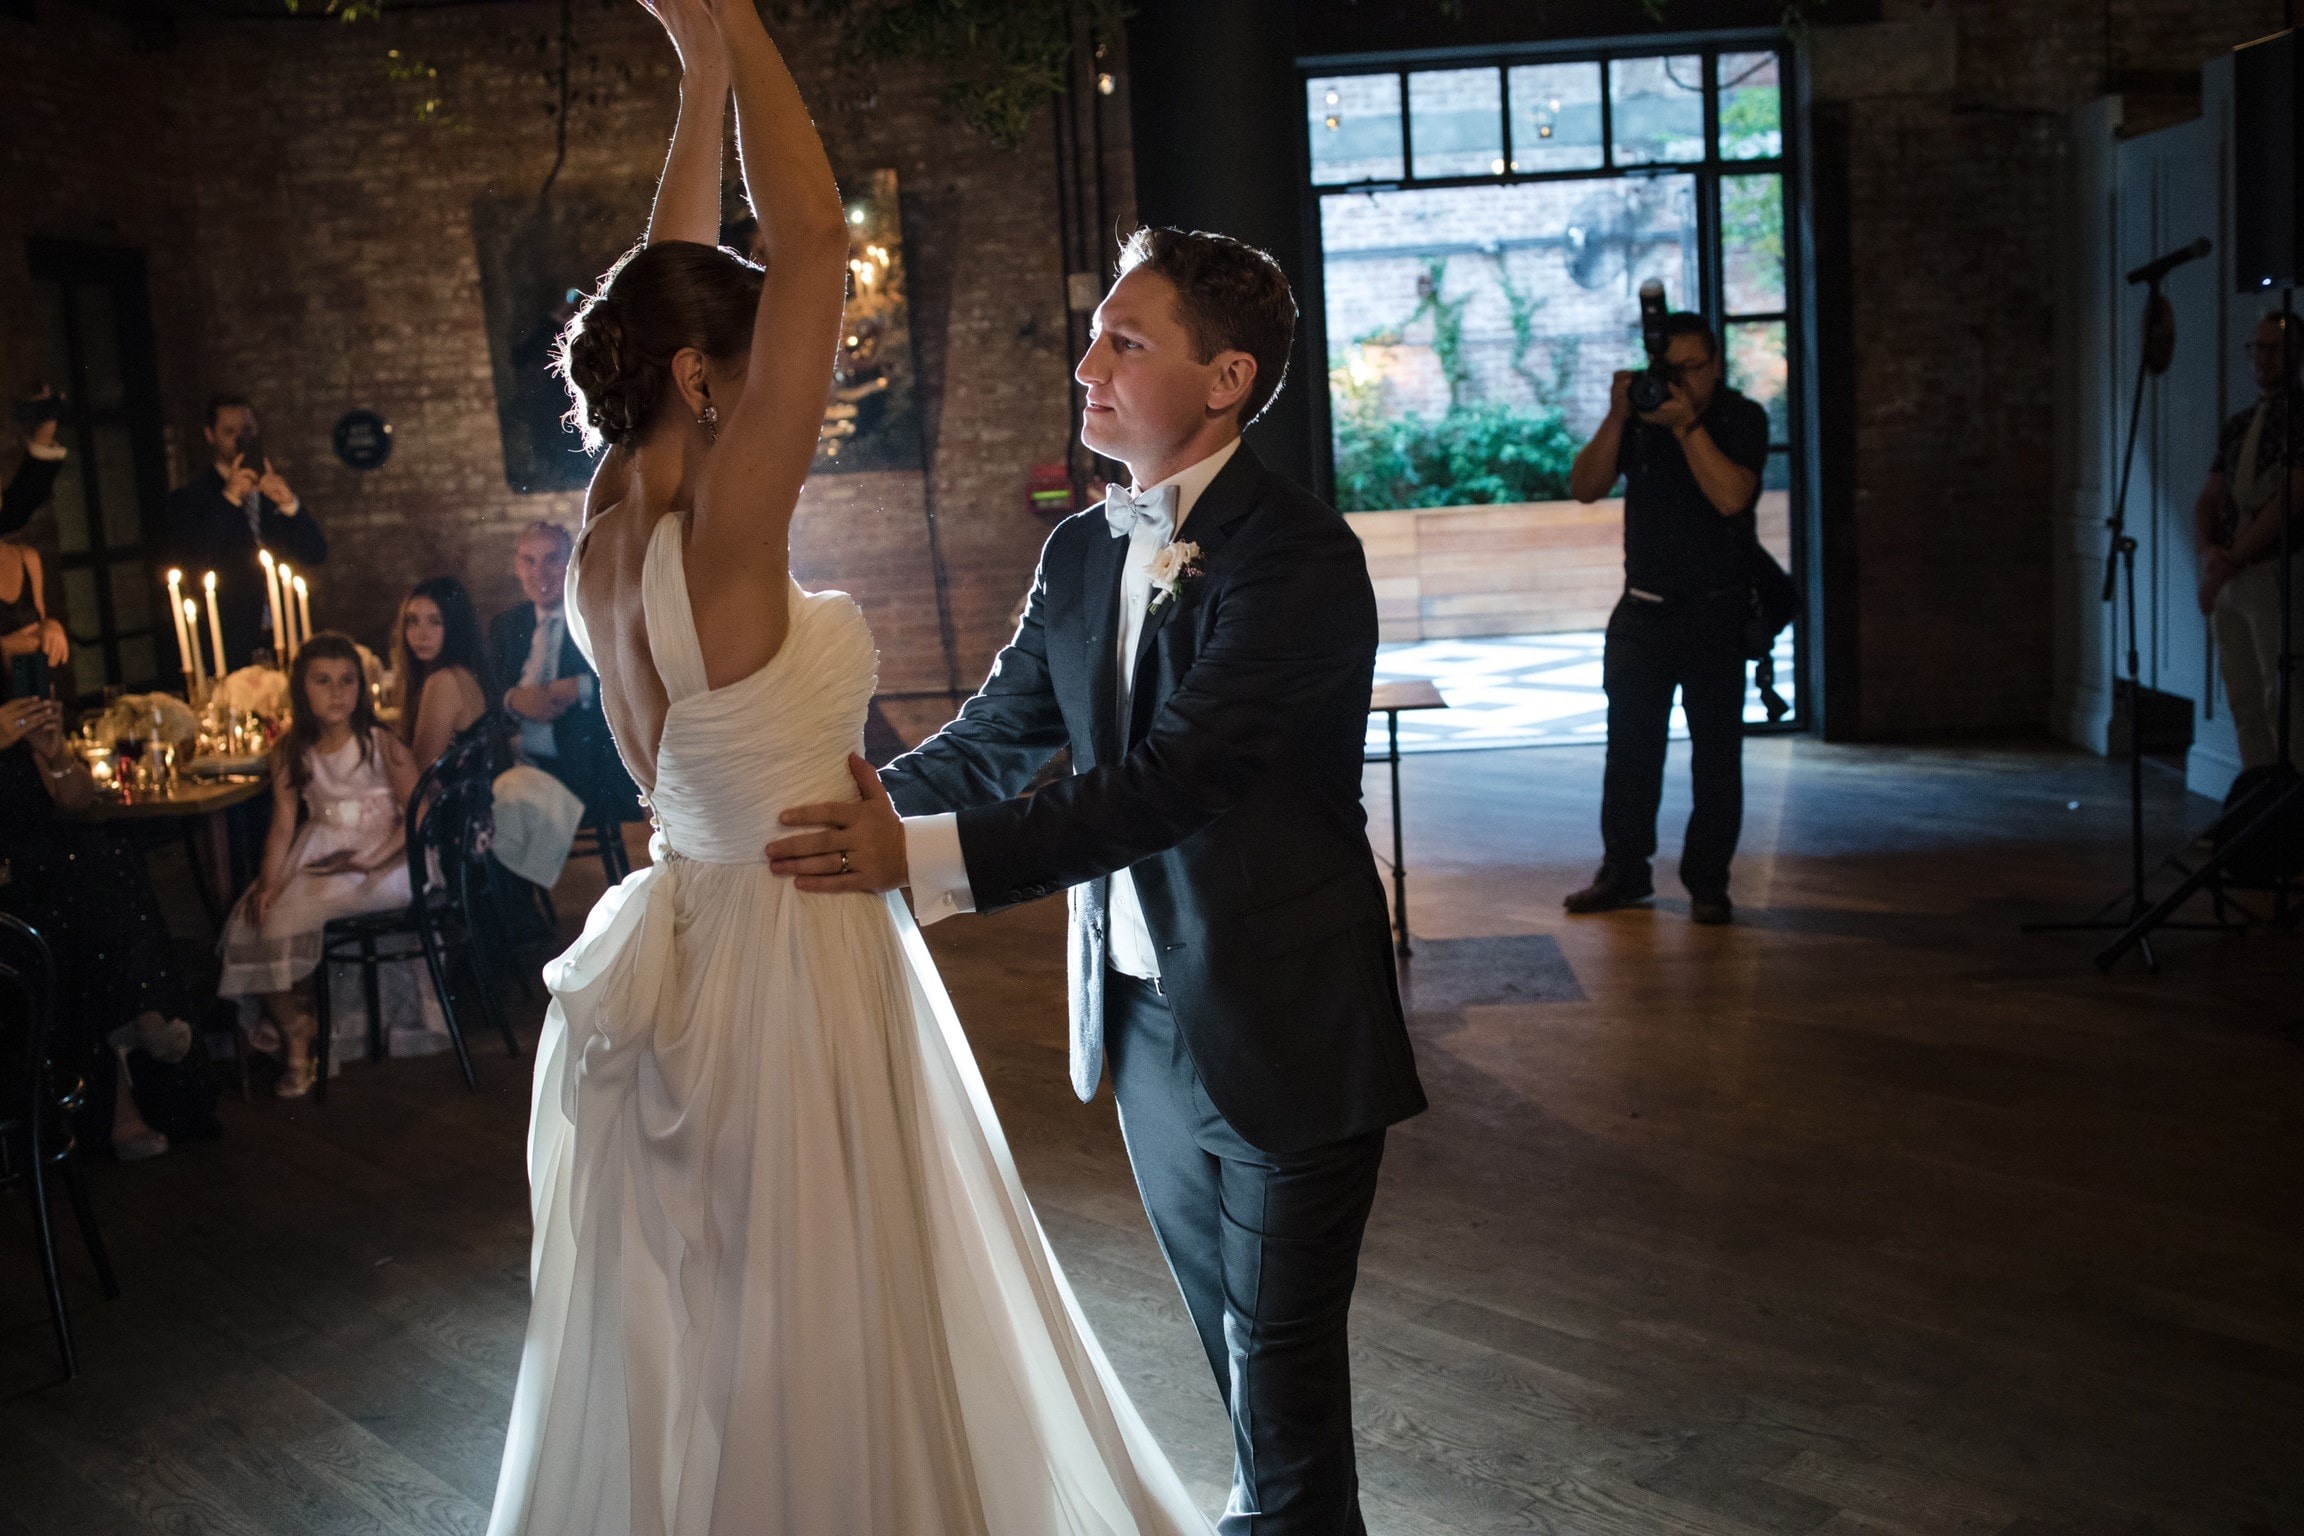 Ania and Adam's first dance. Wedding routine choreographed by Brooklyn Dance Lessons.